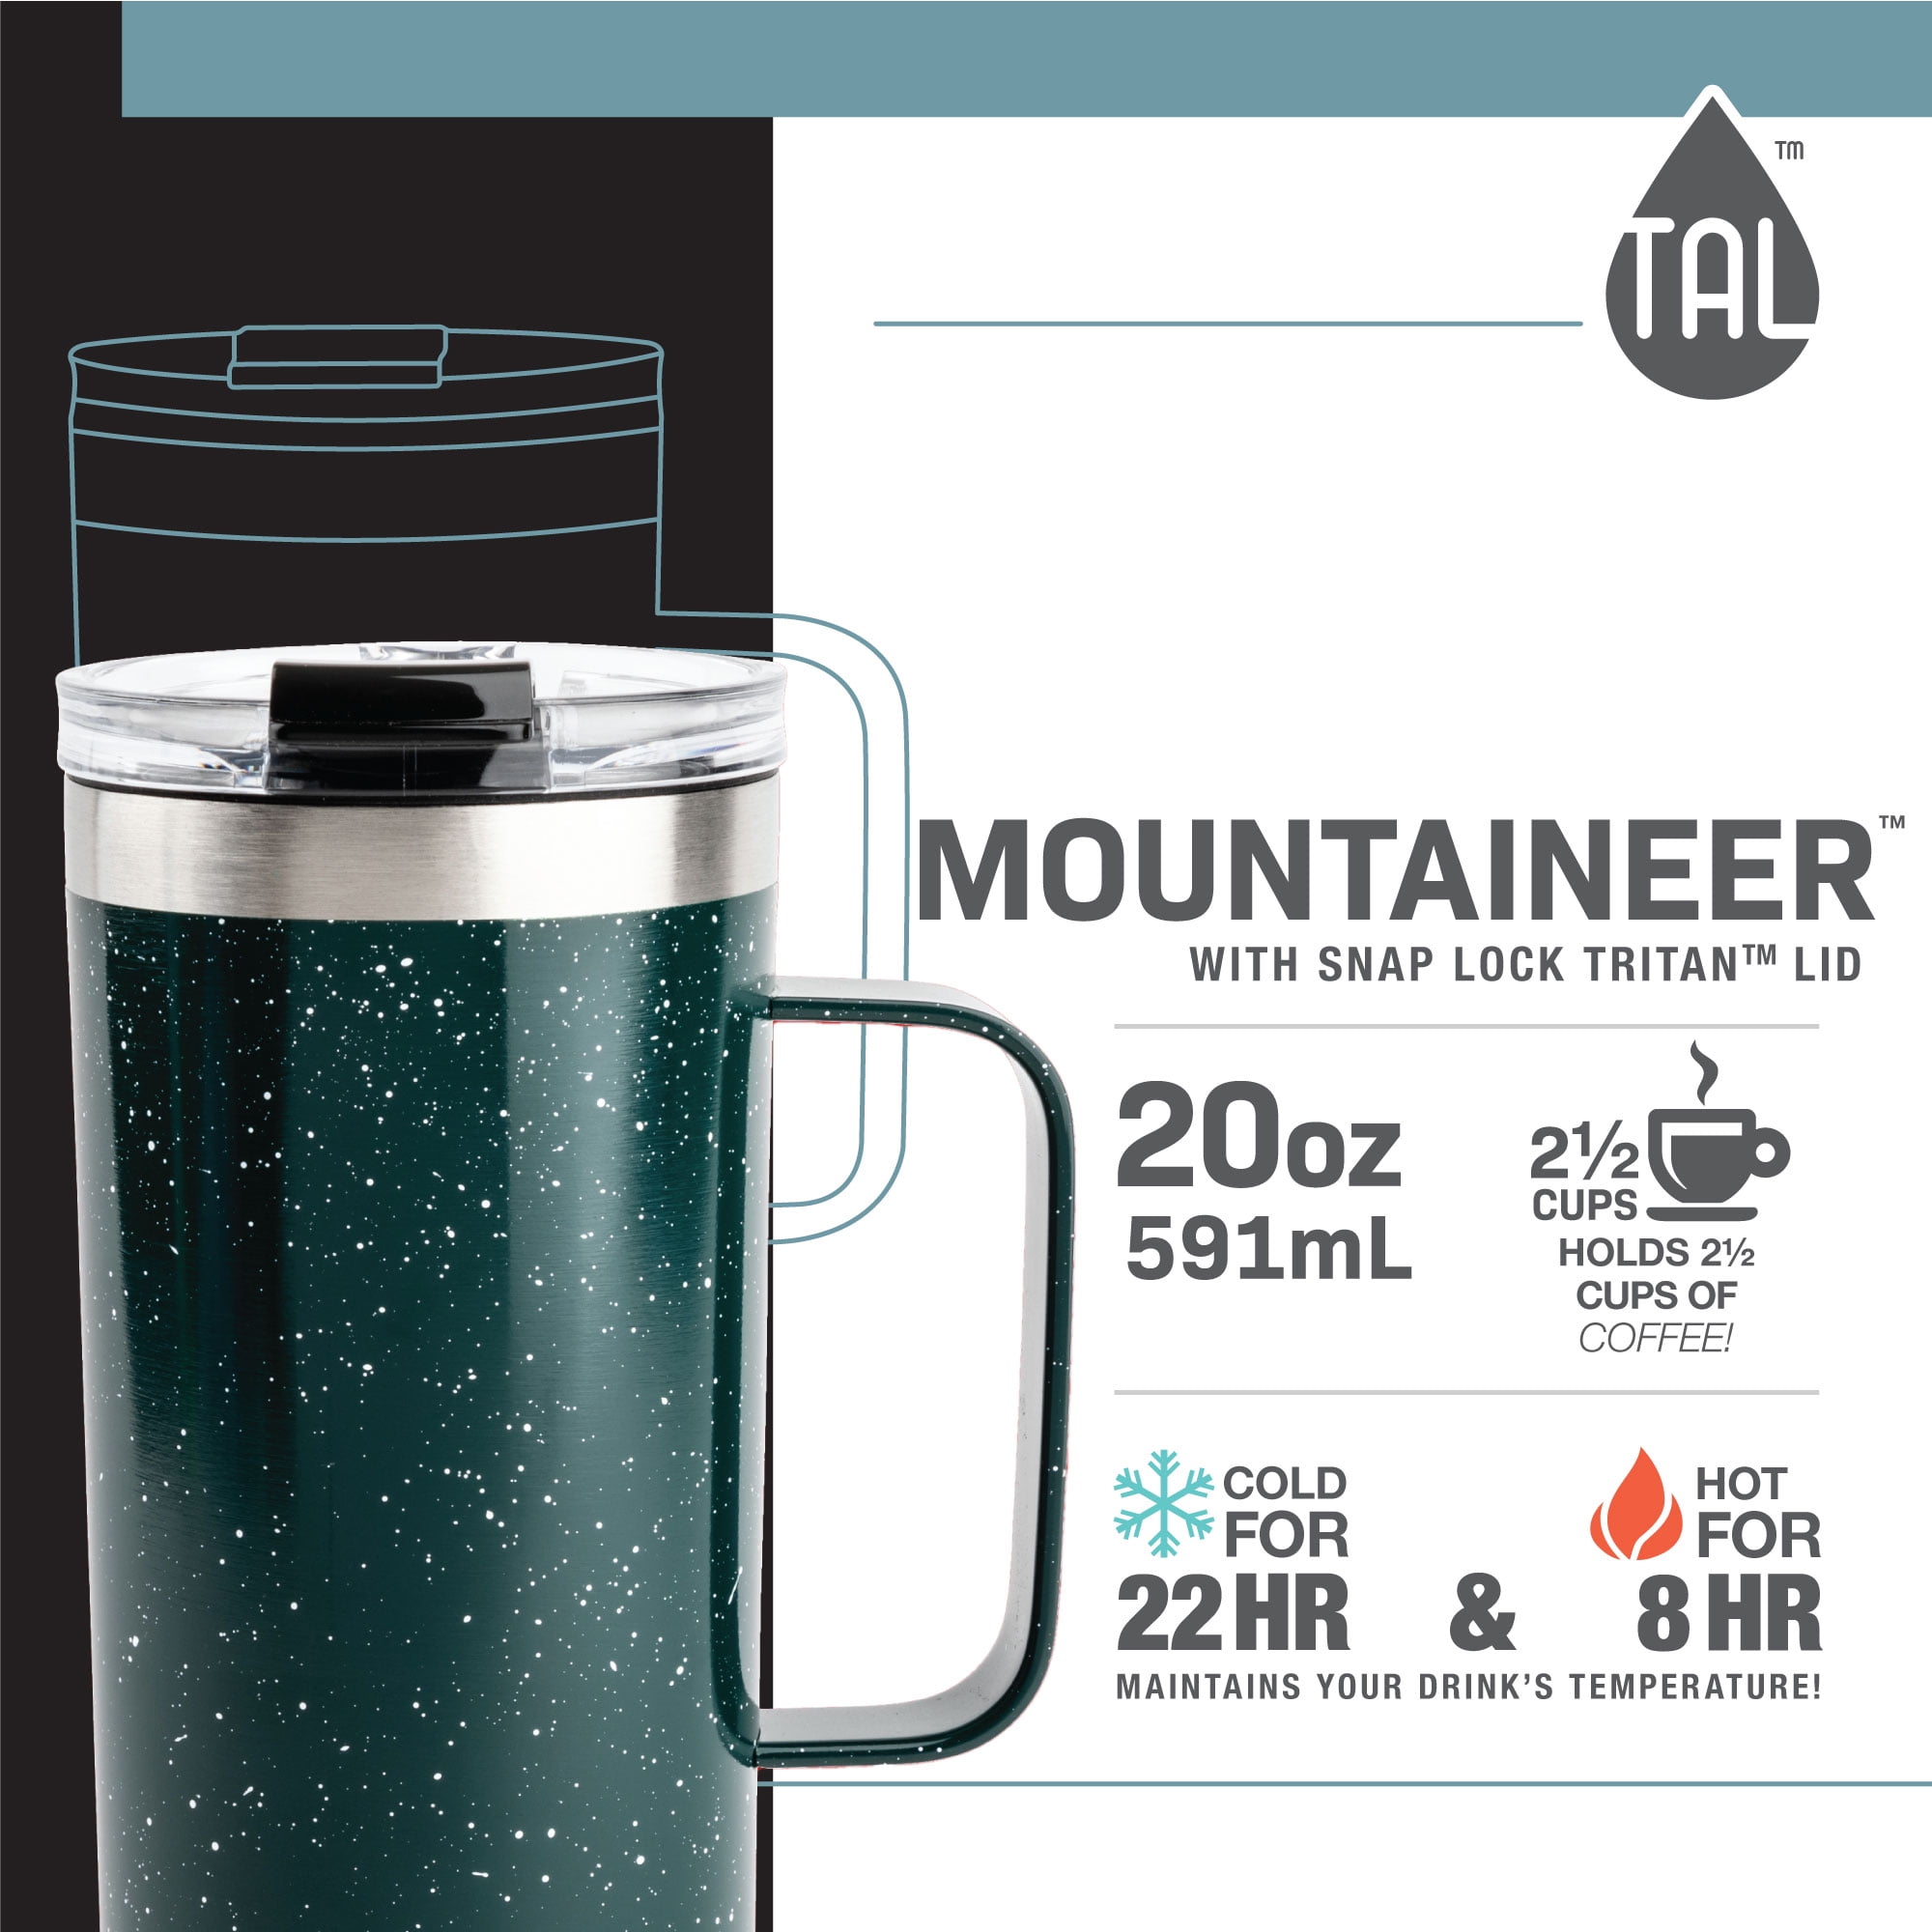 Tal Stainless Steel Mountaineer Coffee Mug 2 Pack, 20 fl oz and 12 fl oz, Black and Gold